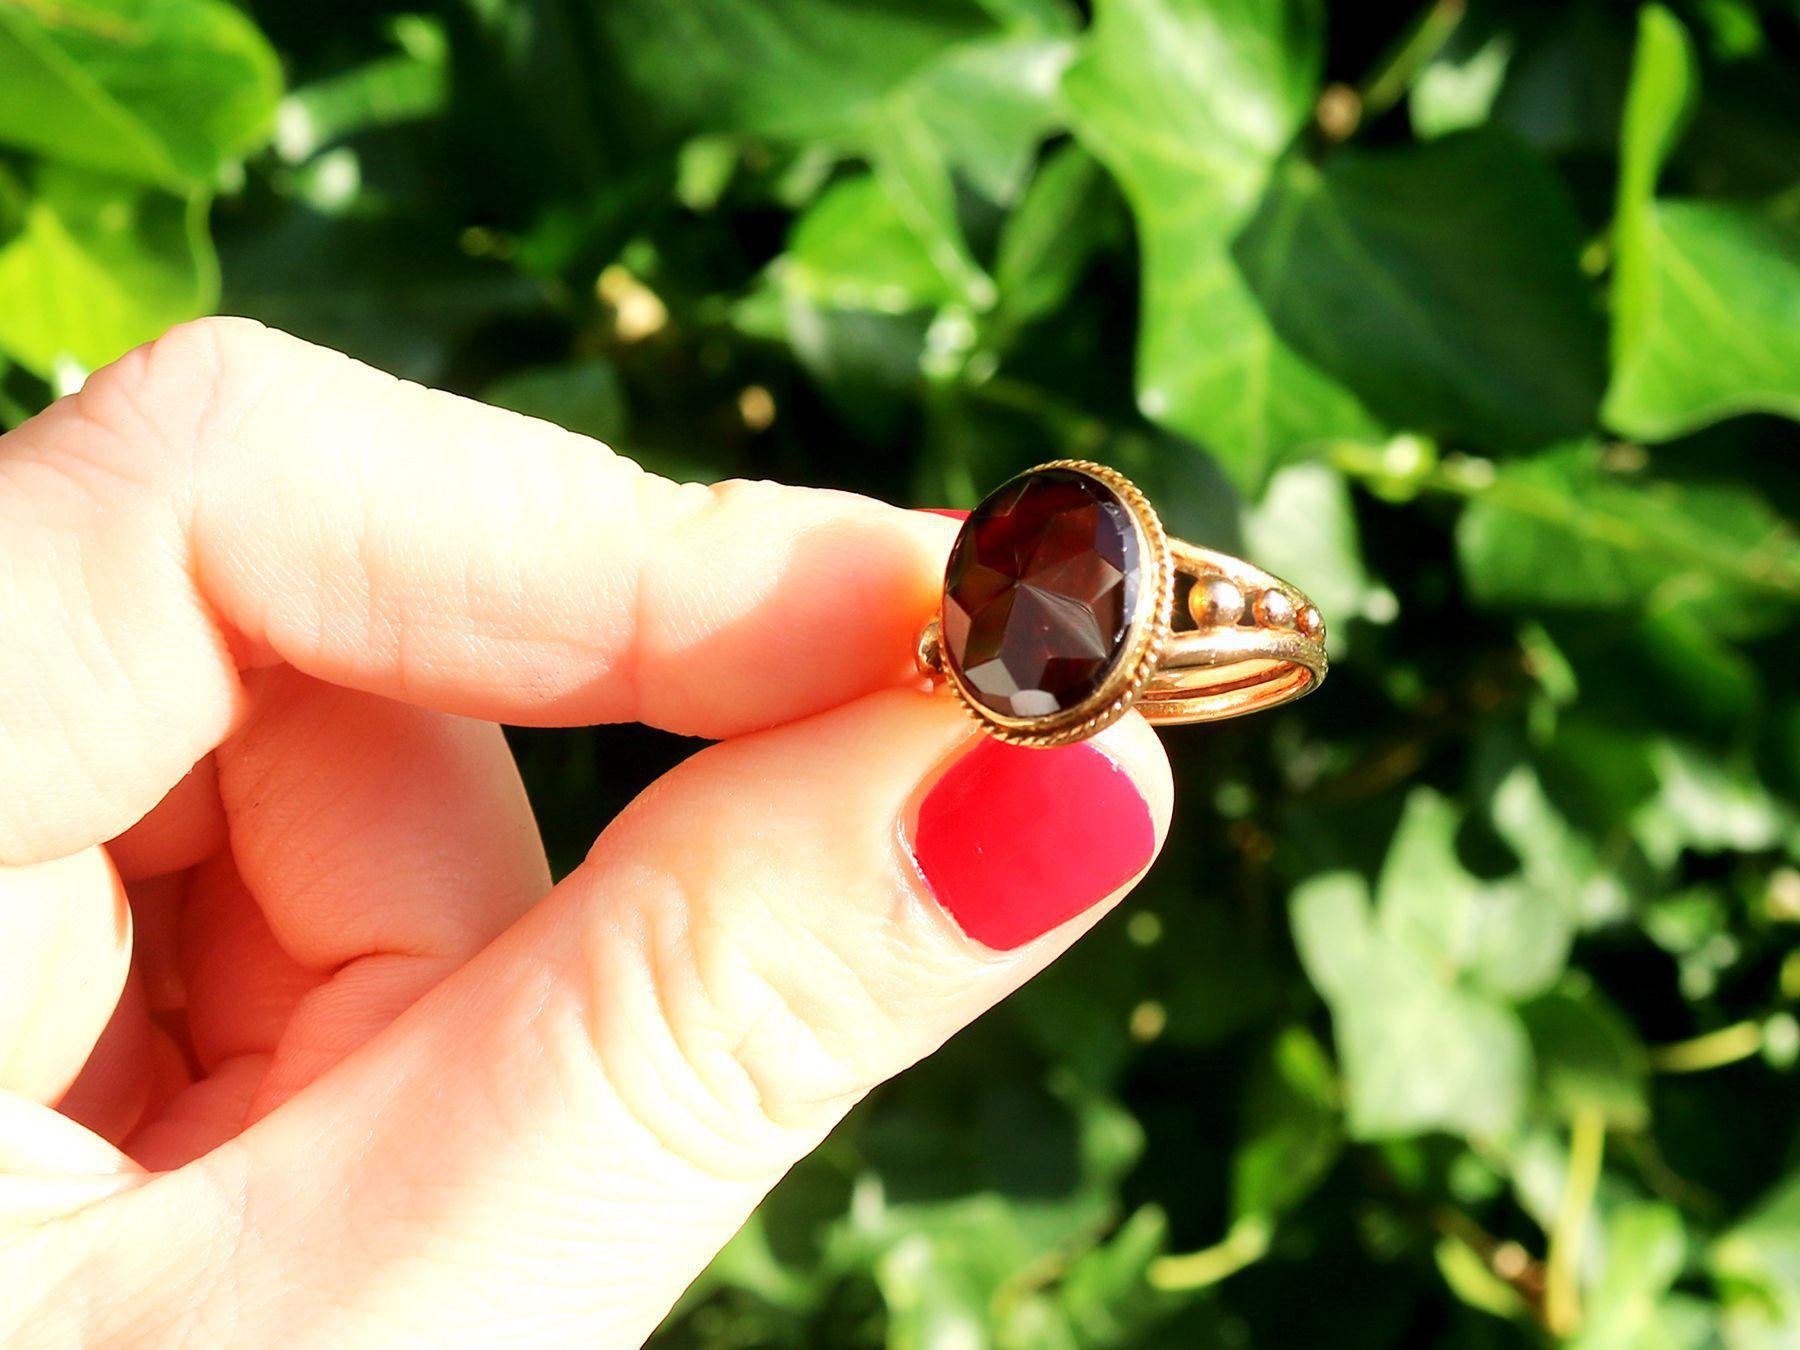 A fine and impressive 4.75 carat garnet and 15 karat yellow gold dress ring; part of our diverse antique jewelry and estate jewelry collections.

This impressive Victorian ring has been crafted in 15k yellow gold.

The substantial antique ring